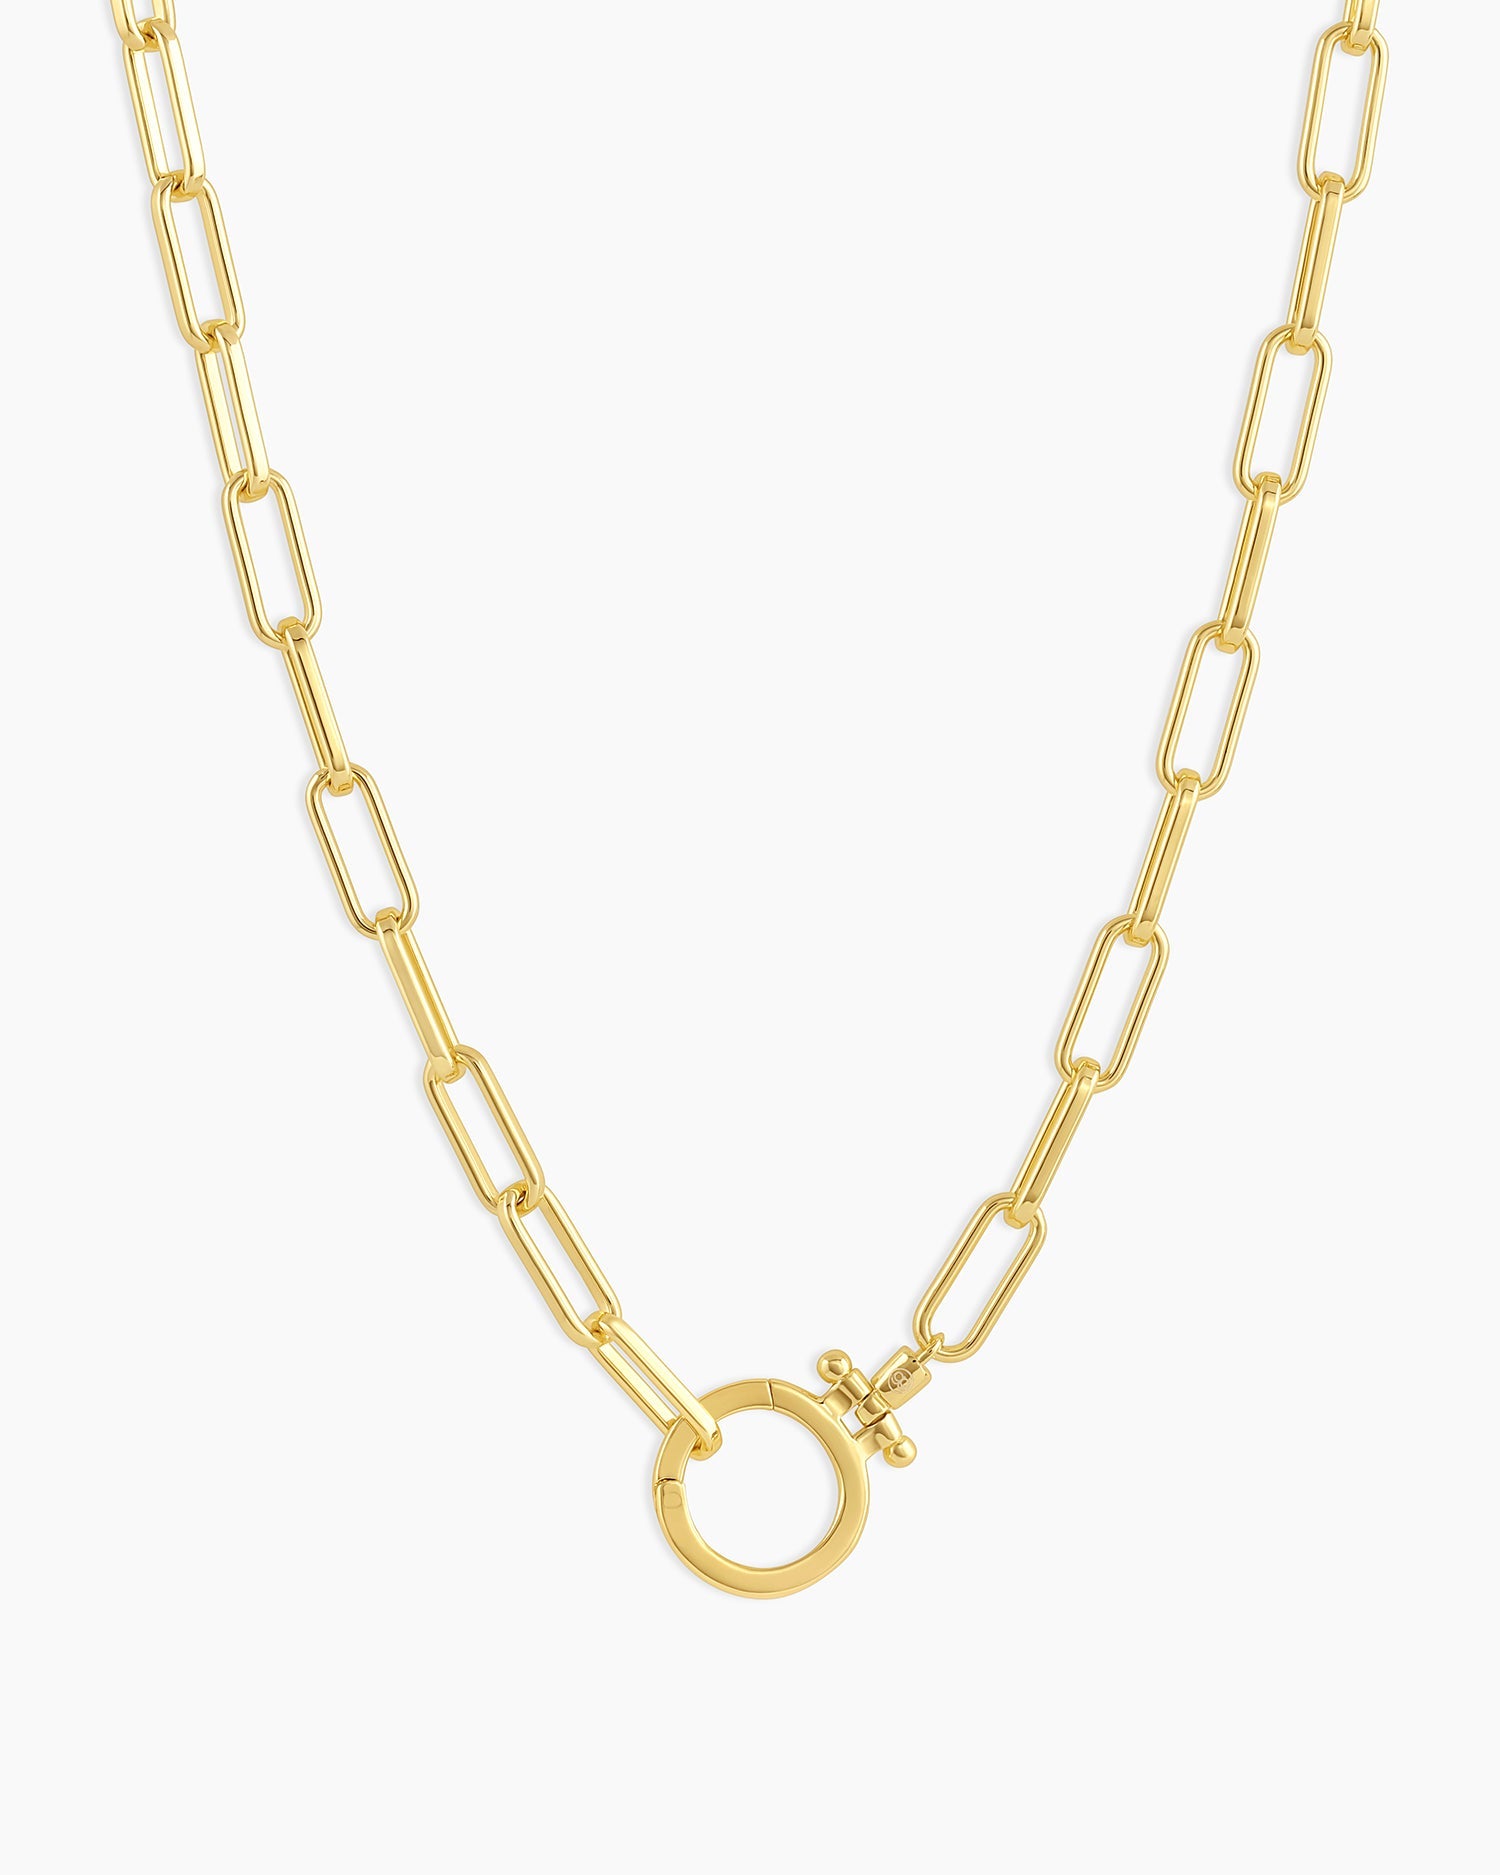 Buy 14K Solid Yellow Gold Herringbone Chain Necklace, 6mm Thick, 16 18 20  24, Real Gold Necklace, Flat Gold Chain, Herringbone Gold Chain Online in  India - Etsy